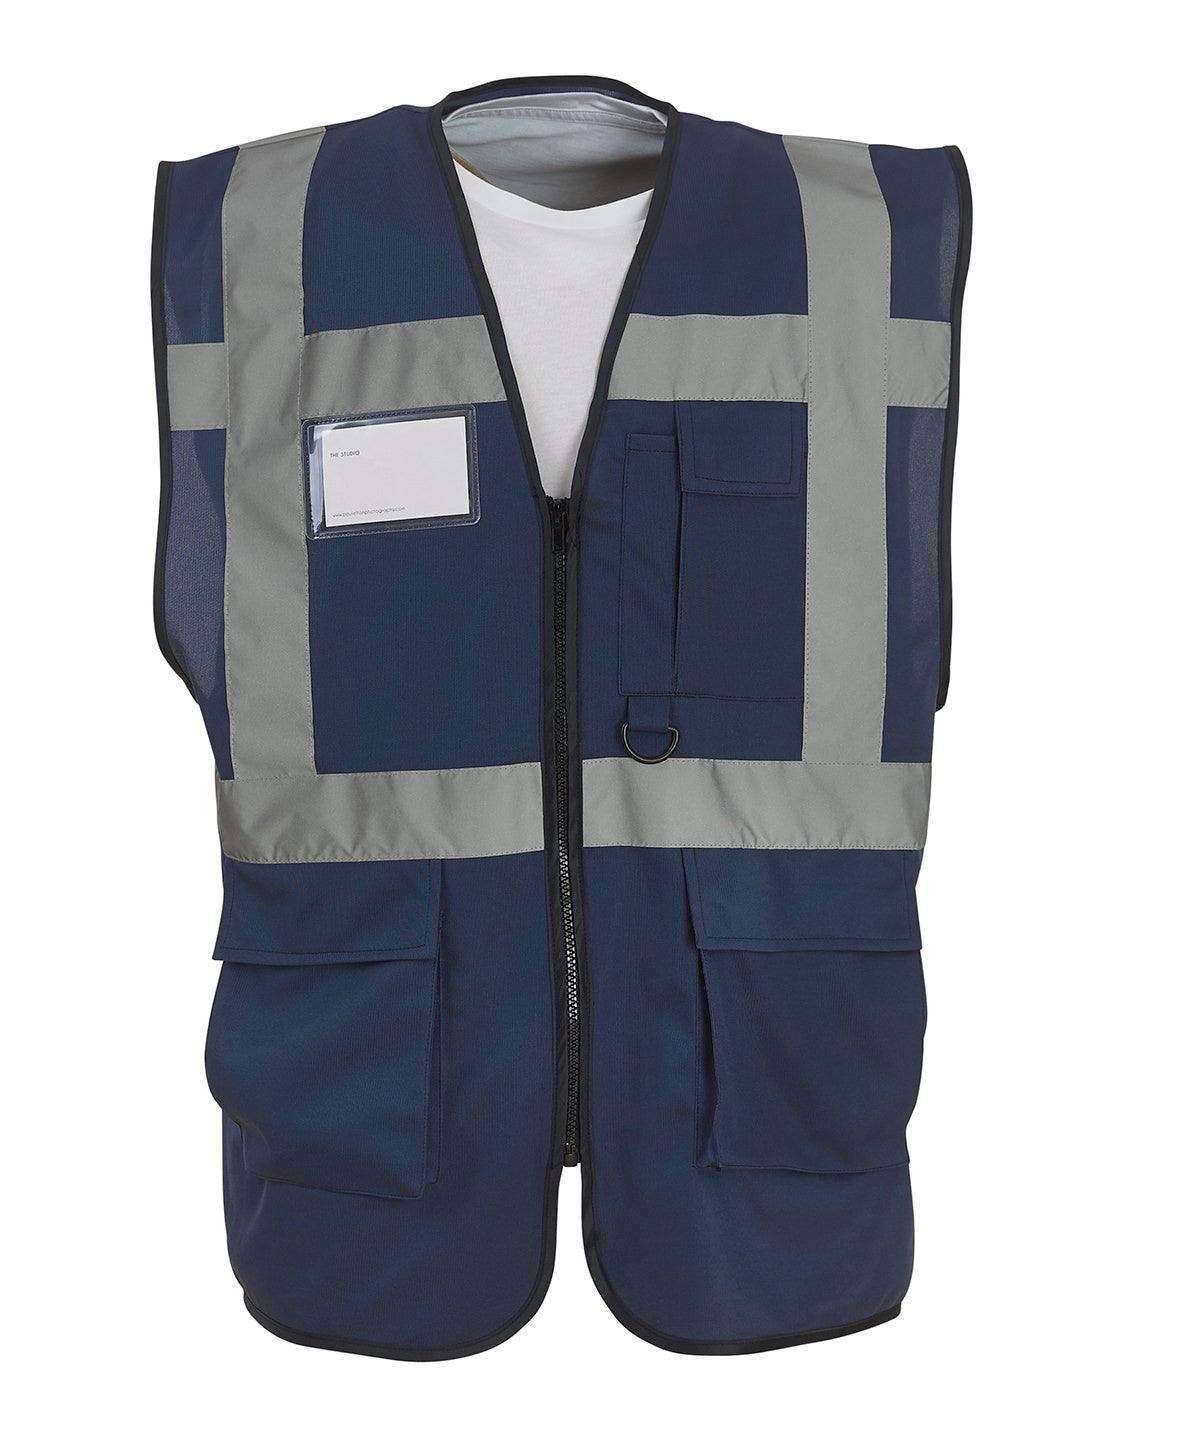 Navy - Multifunctional executive hi-vis waistcoat (HVW801) Safety Vests Yoko Must Haves, Personal Protection, Plus Sizes, Safety Essentials, Safetywear, Workwear Schoolwear Centres